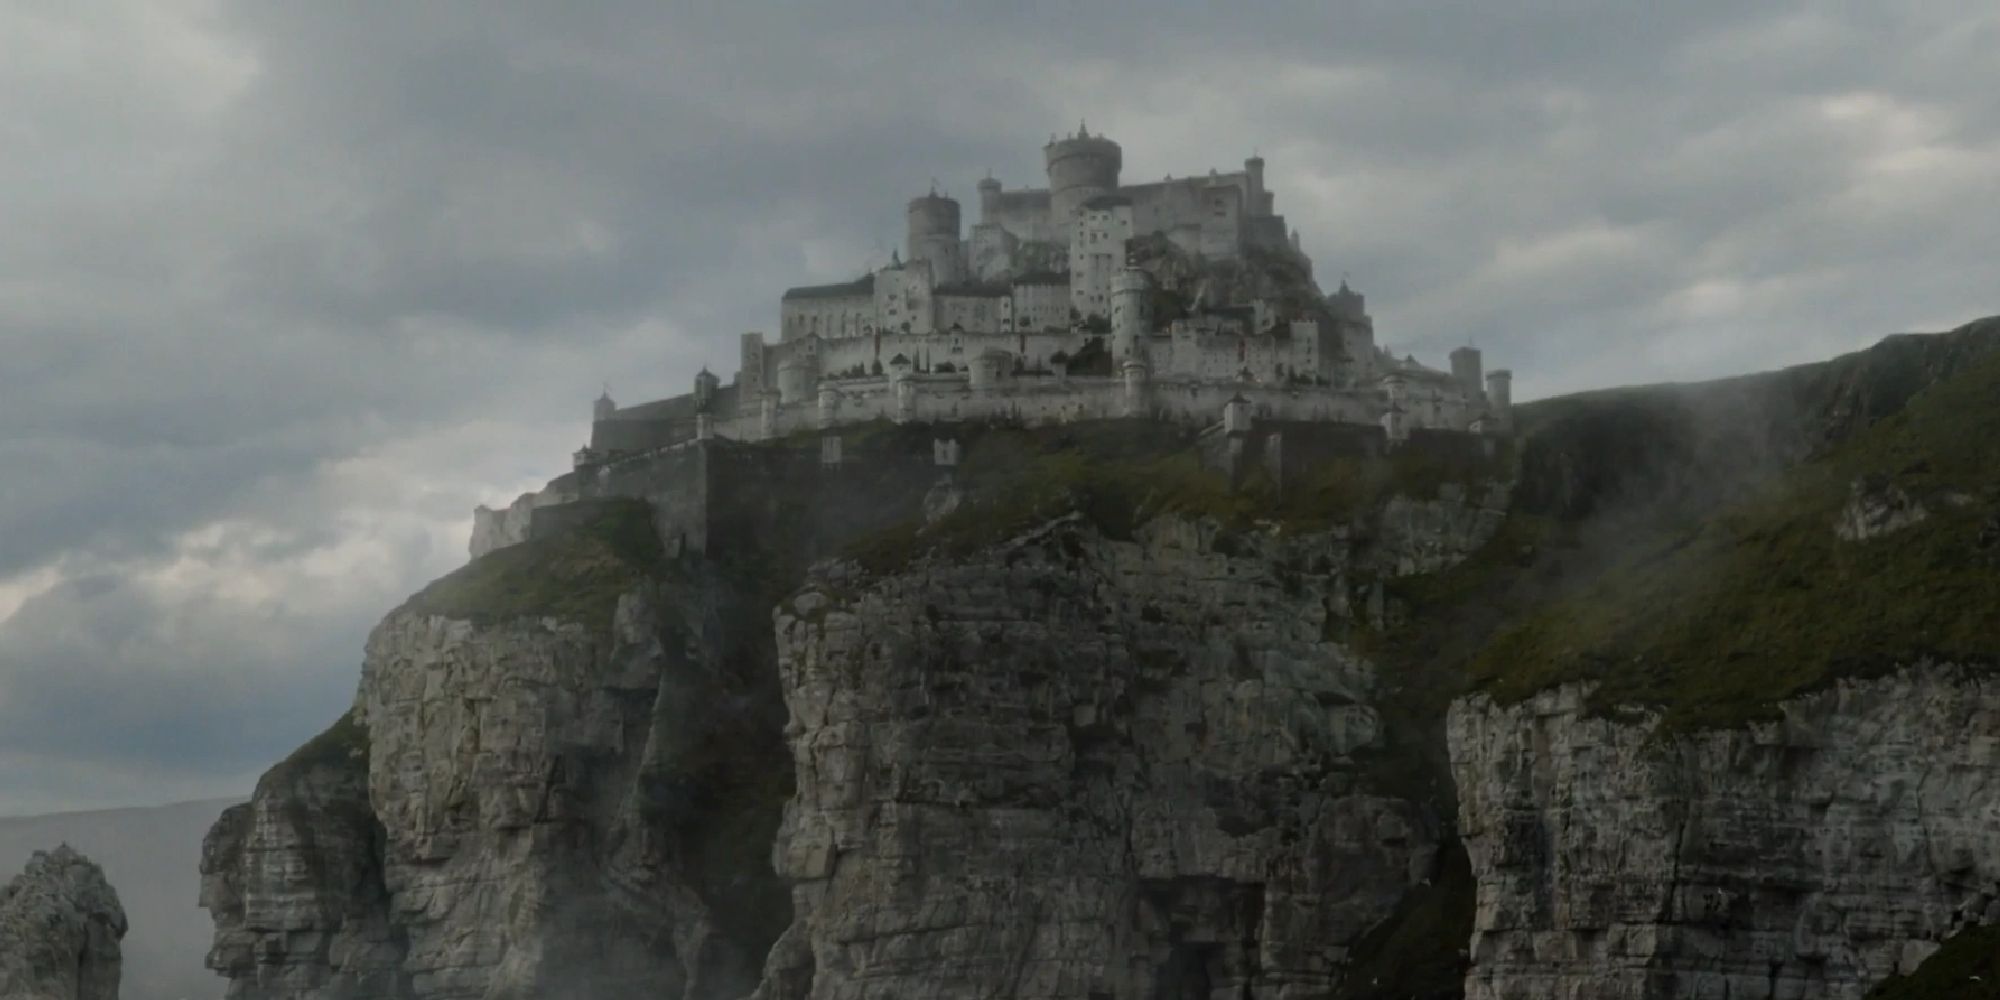 Casterly Rock as it appears in Season 7 of Game of Thrones